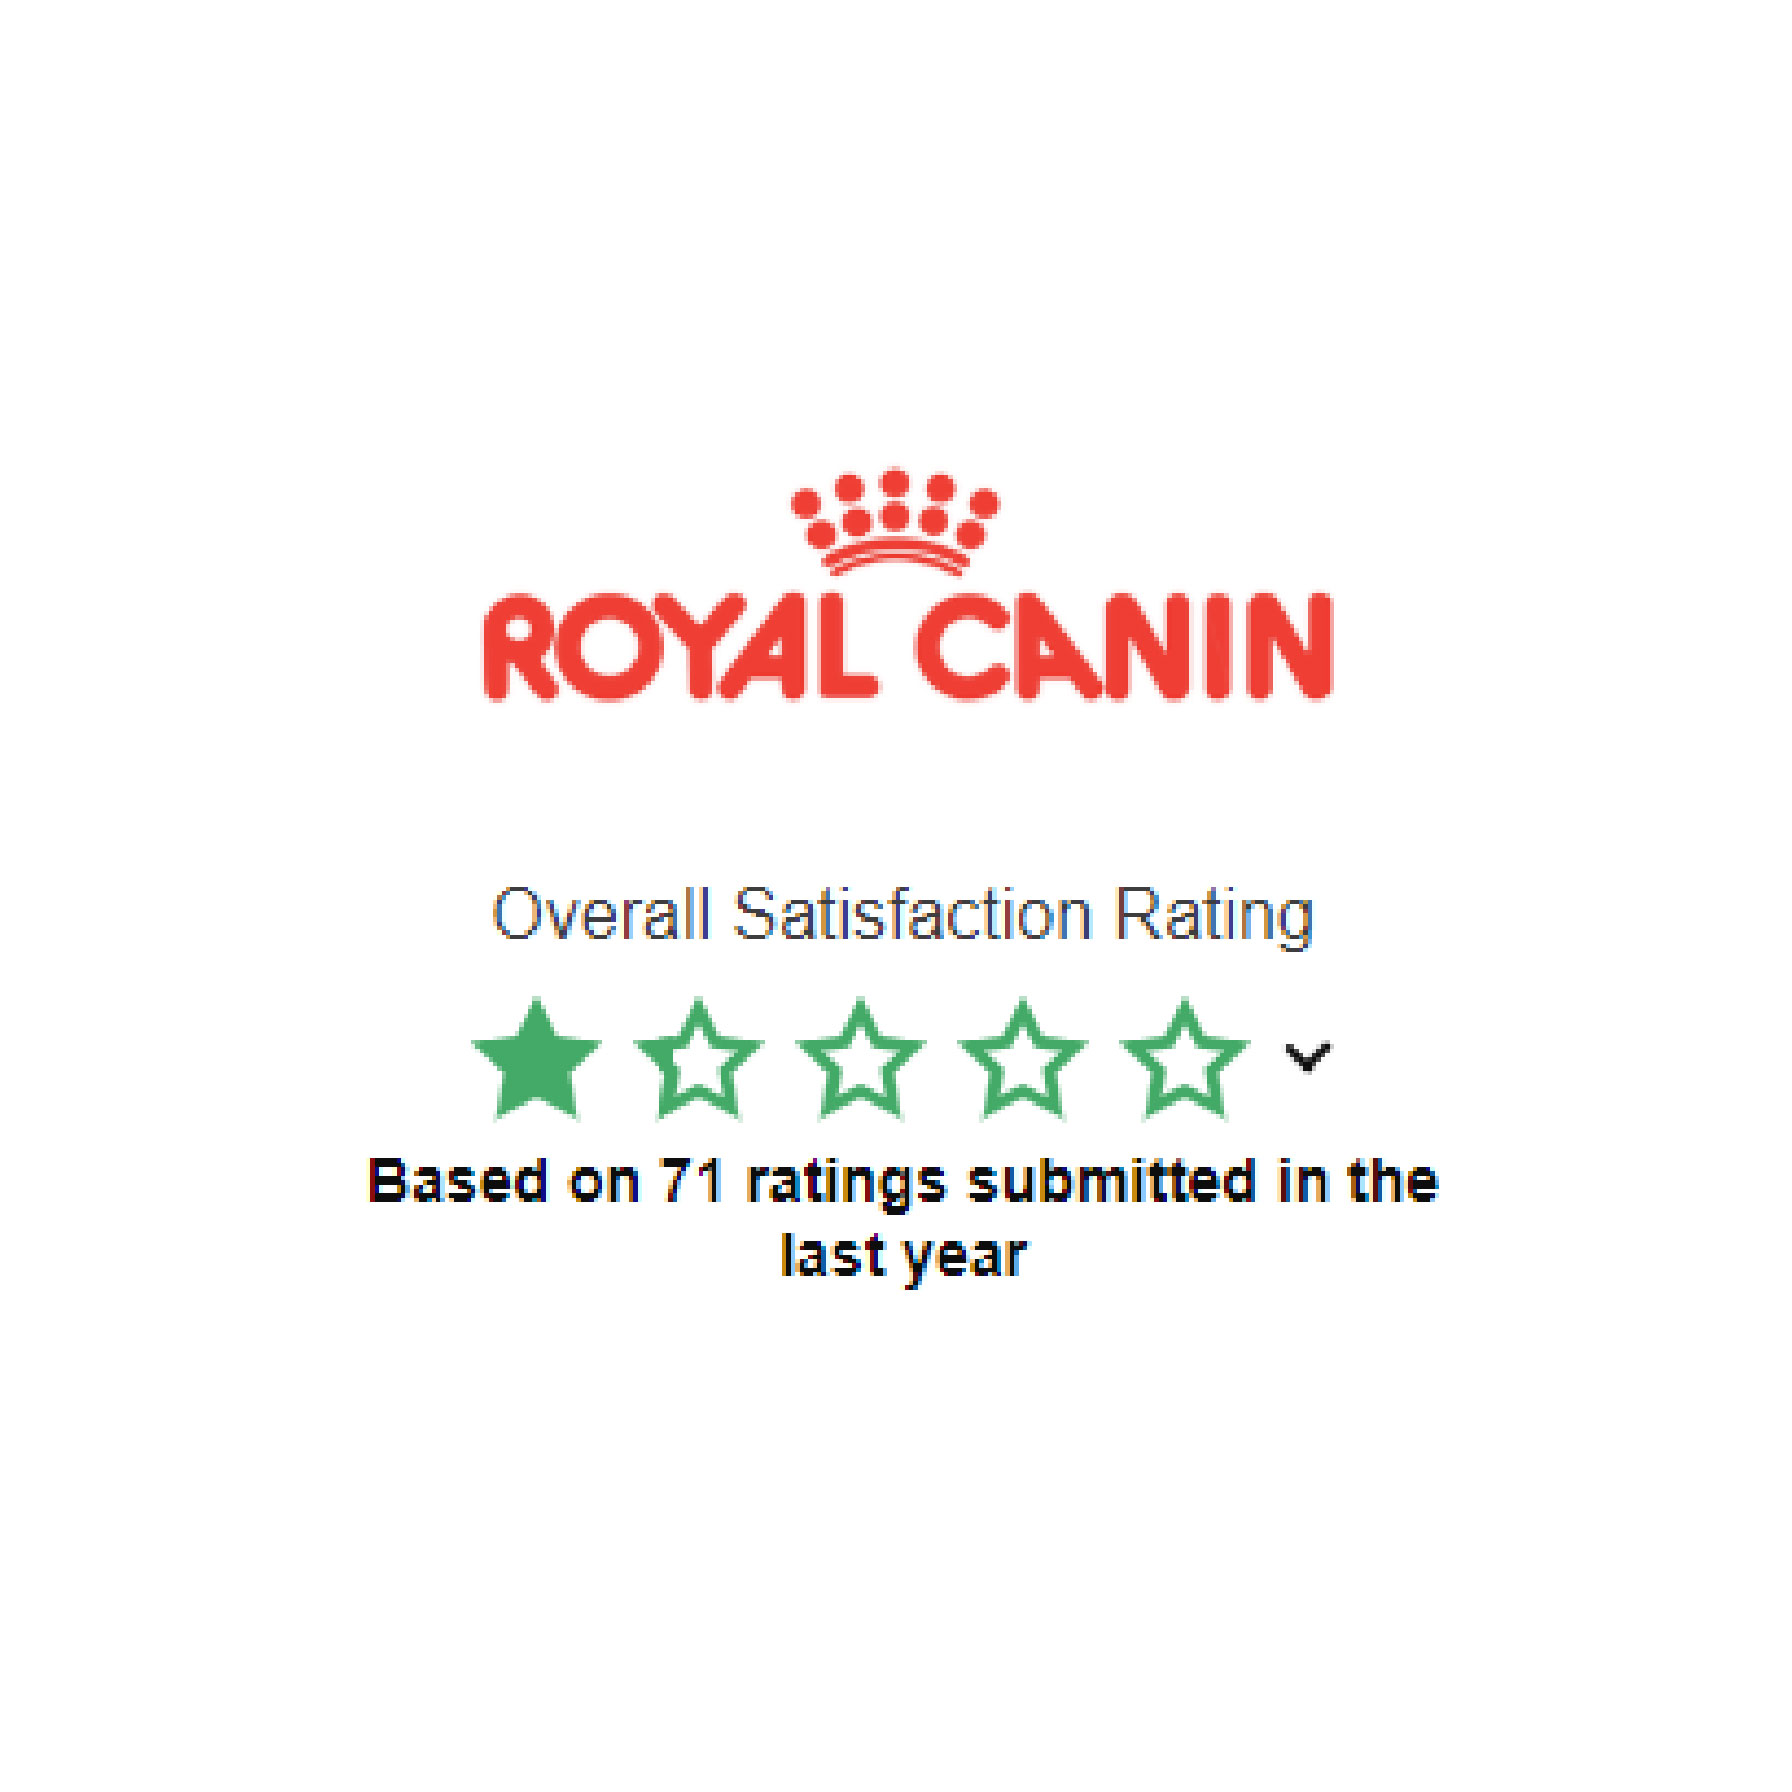 Consumer Reviews for Royal Canin Pet Food - Risks of Commercial Pet Foods for Dogs & Cats